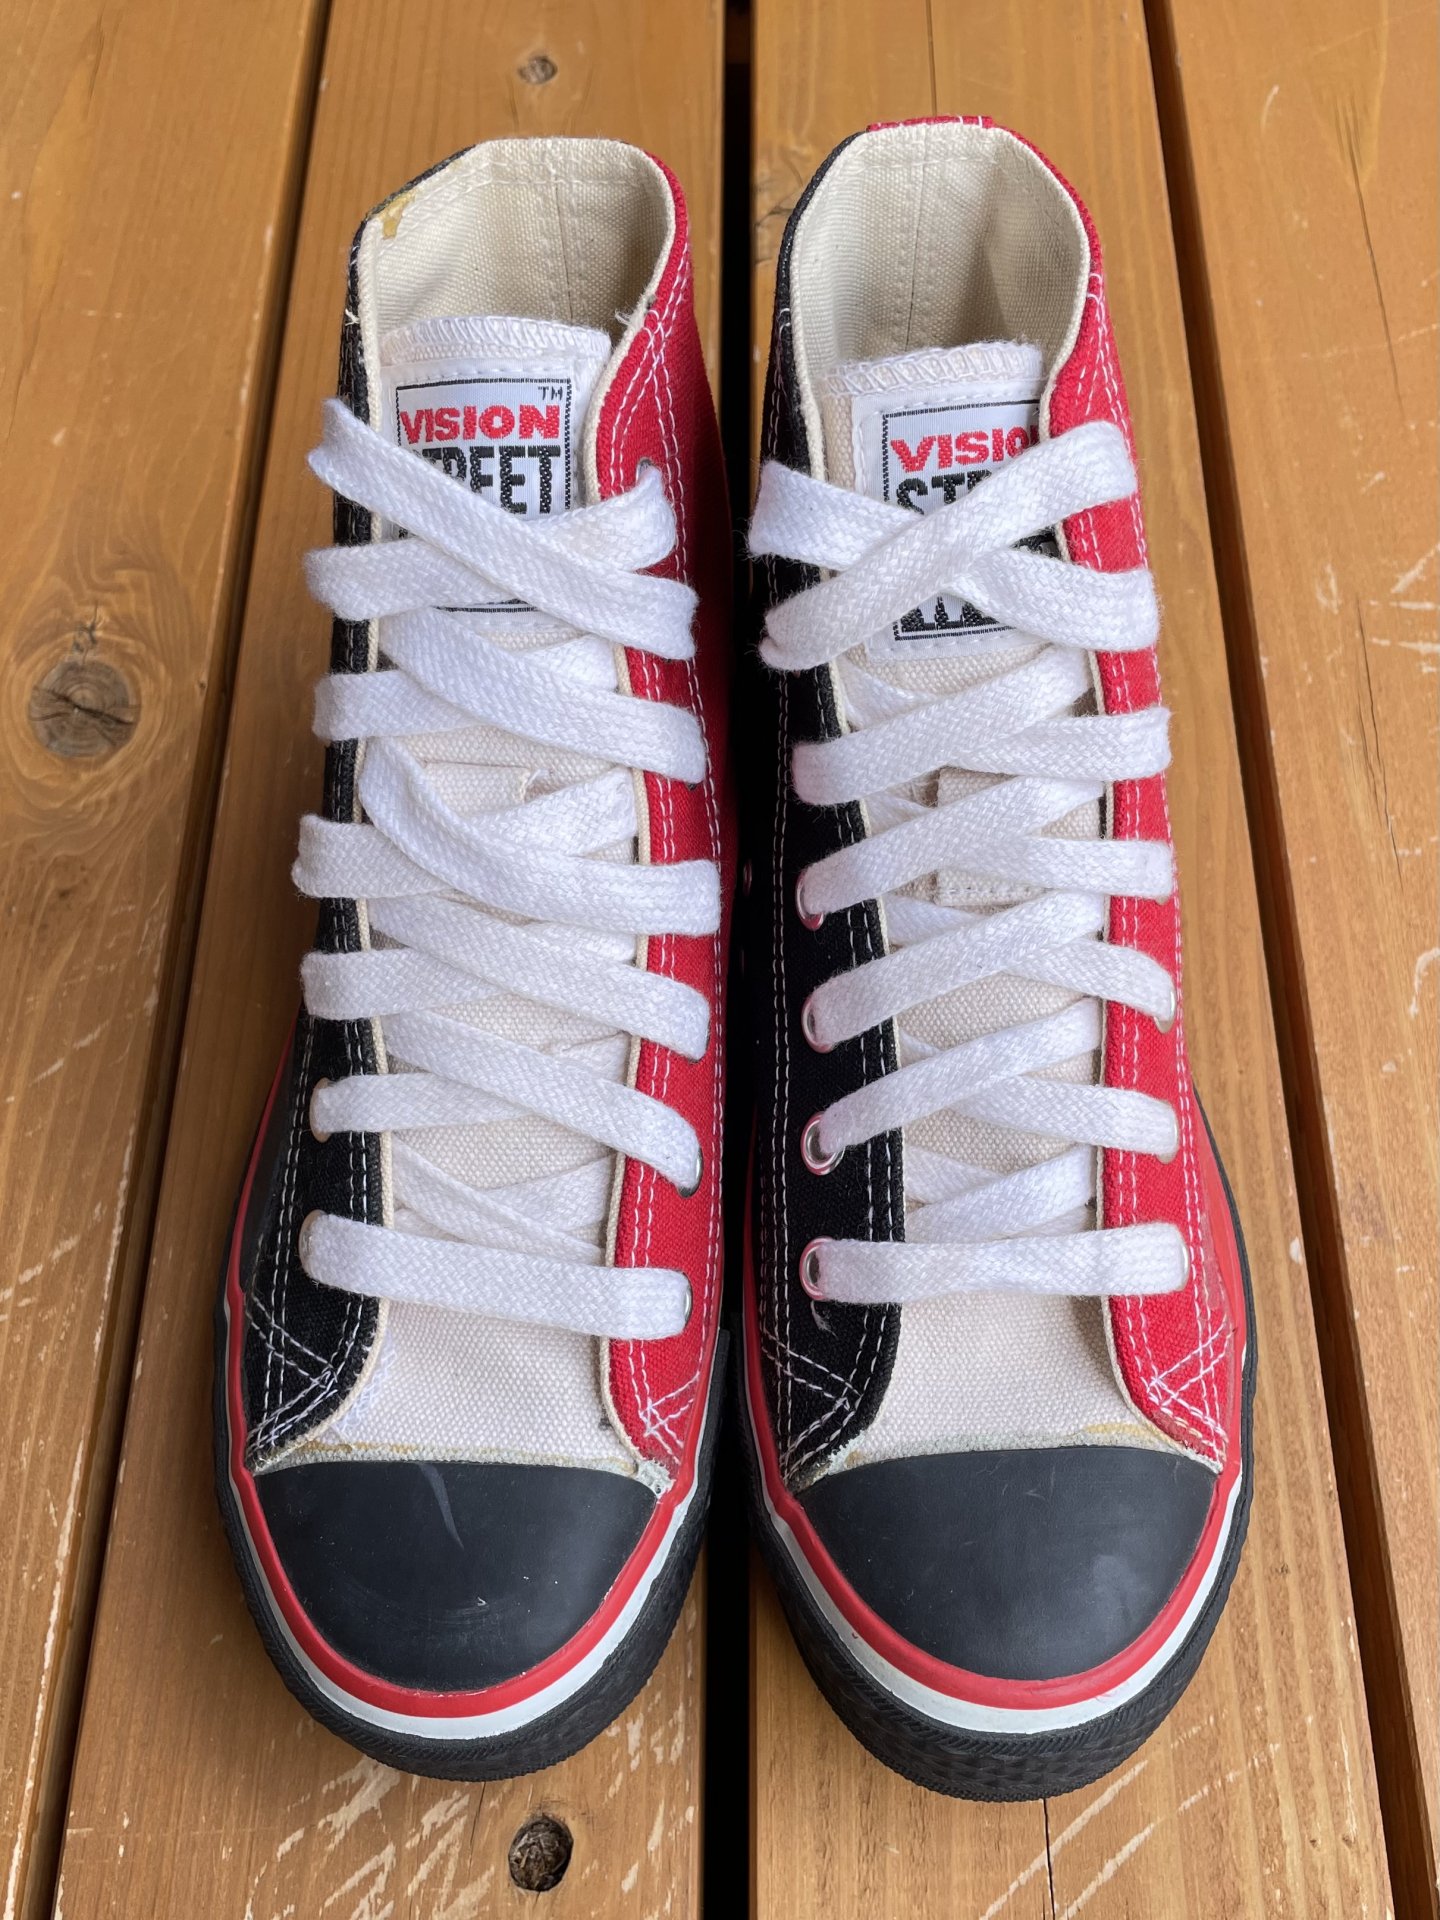 1980's "VISION STREET WEAR" CANVAS SHOES DEADSTOCK - container